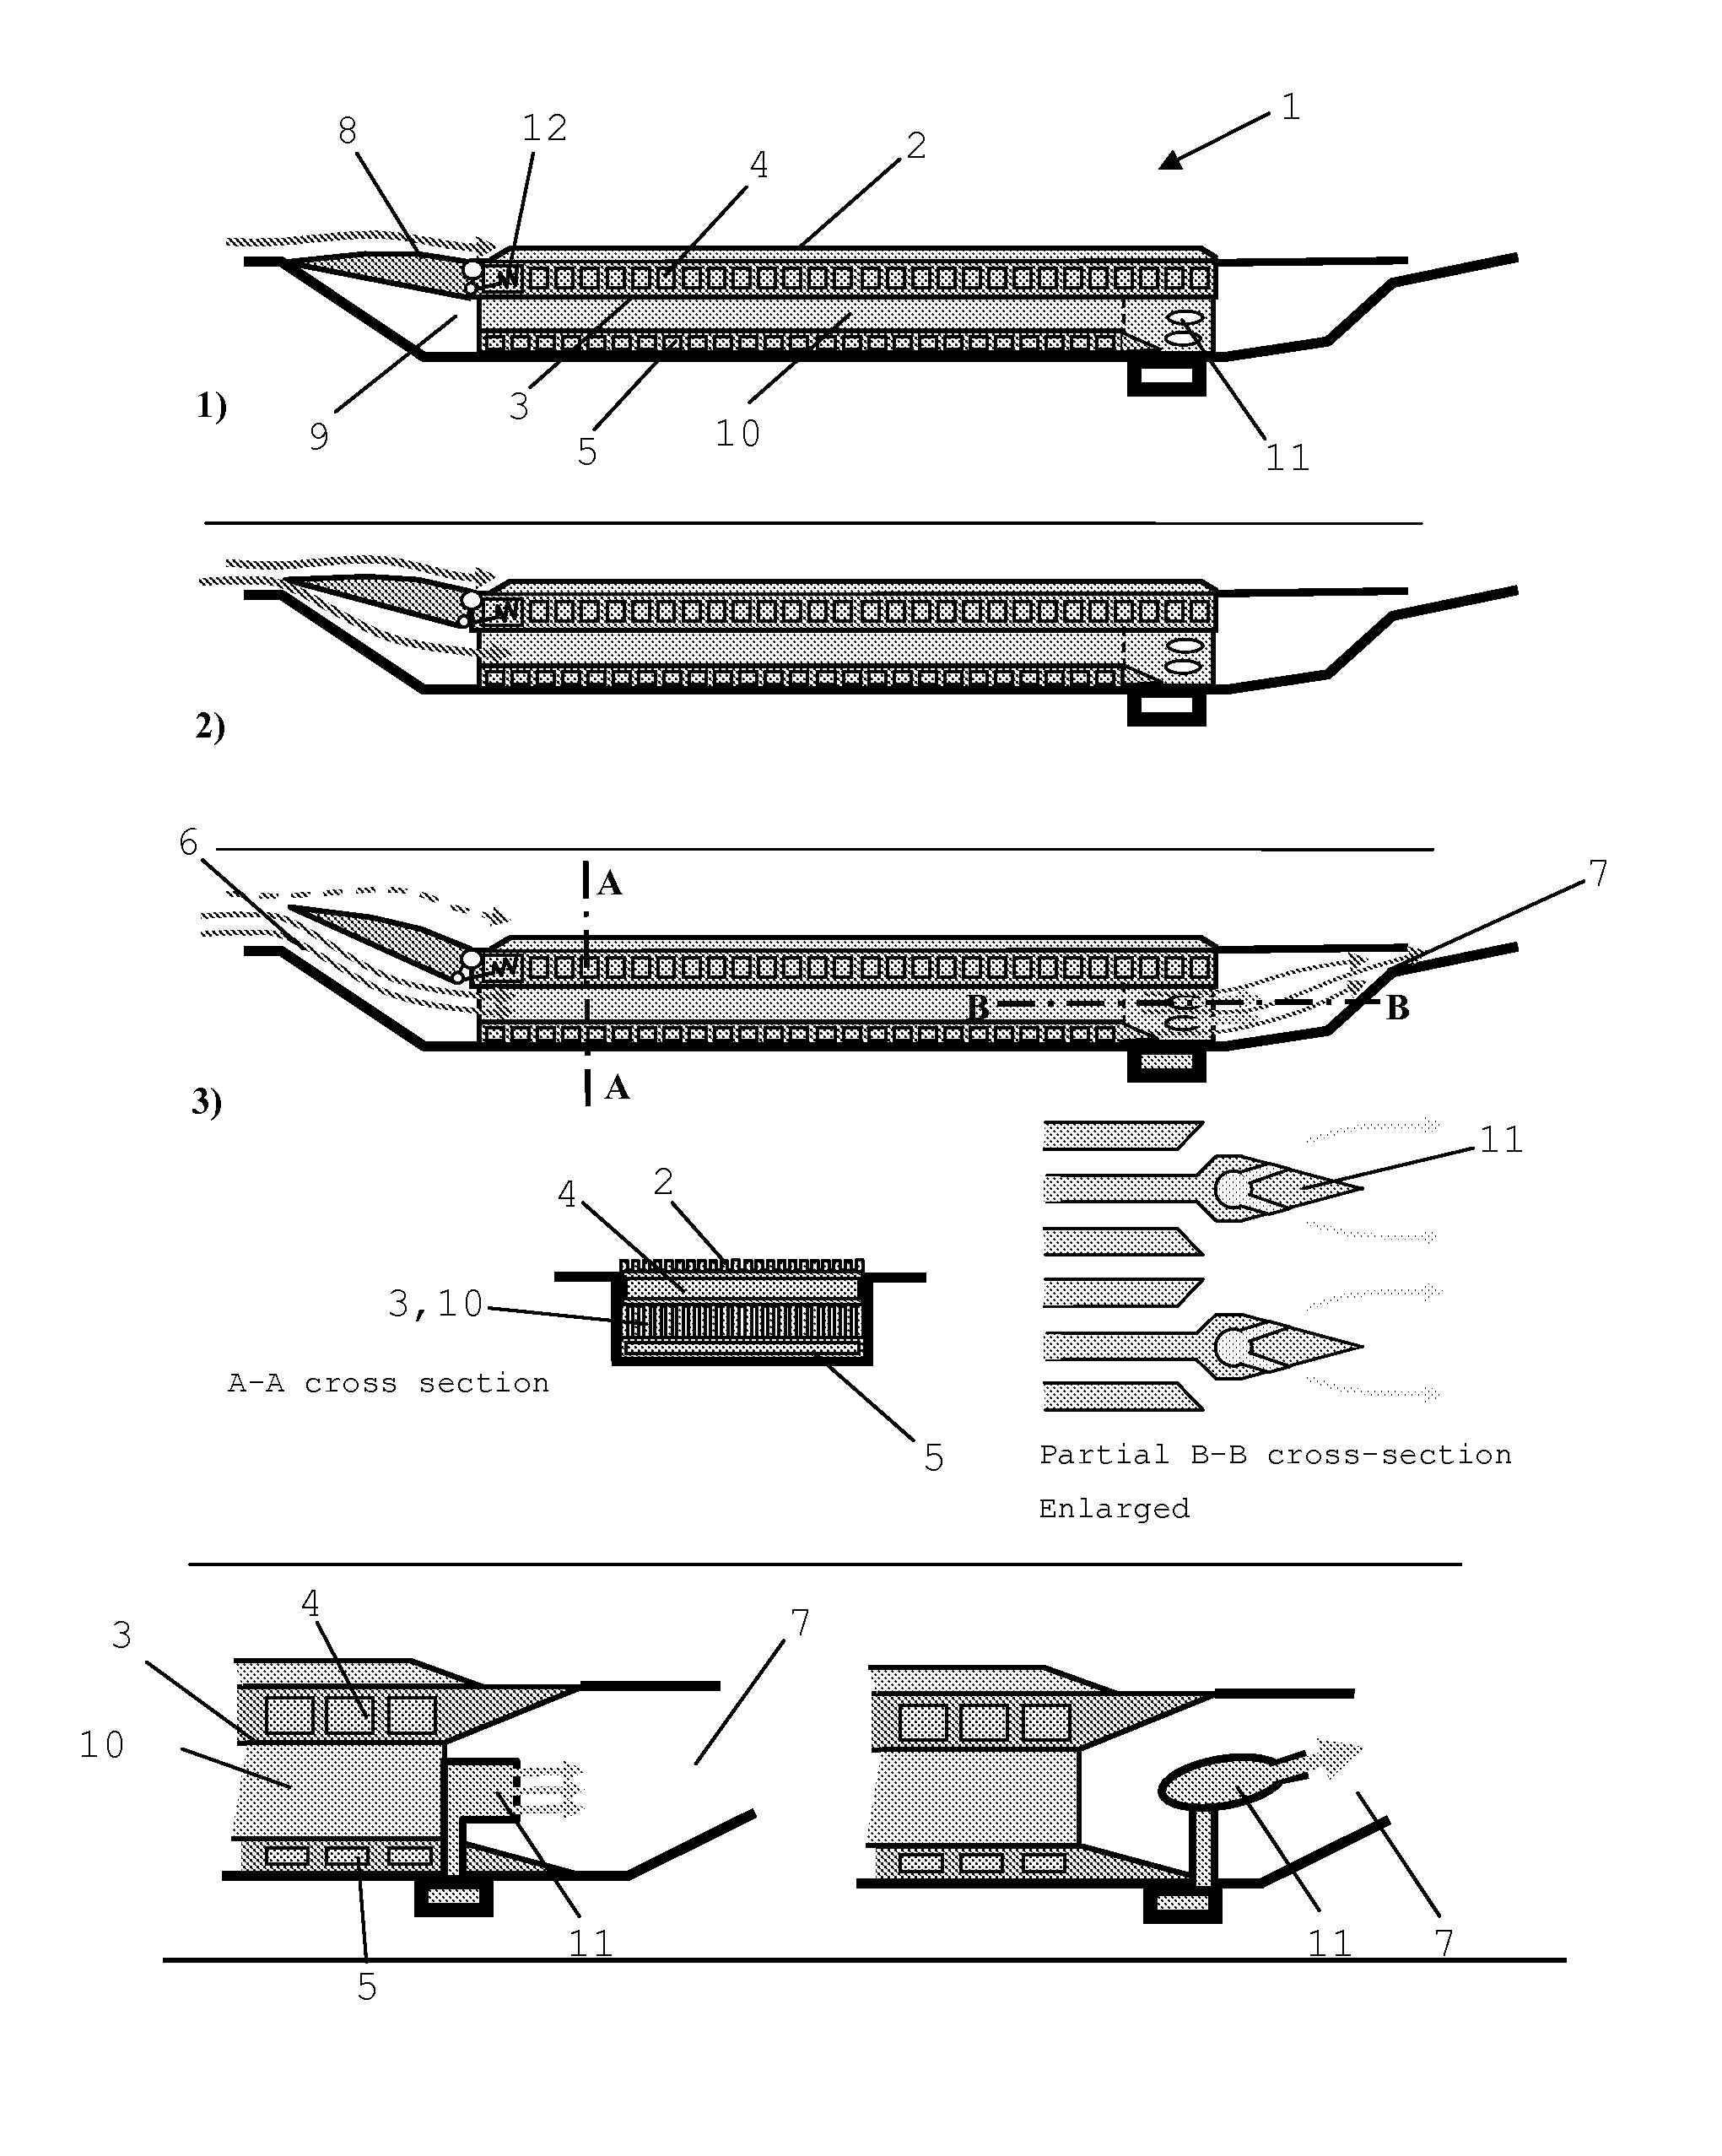 Integration of a surface heat-exchanger with regulated air flow in an airplane engine